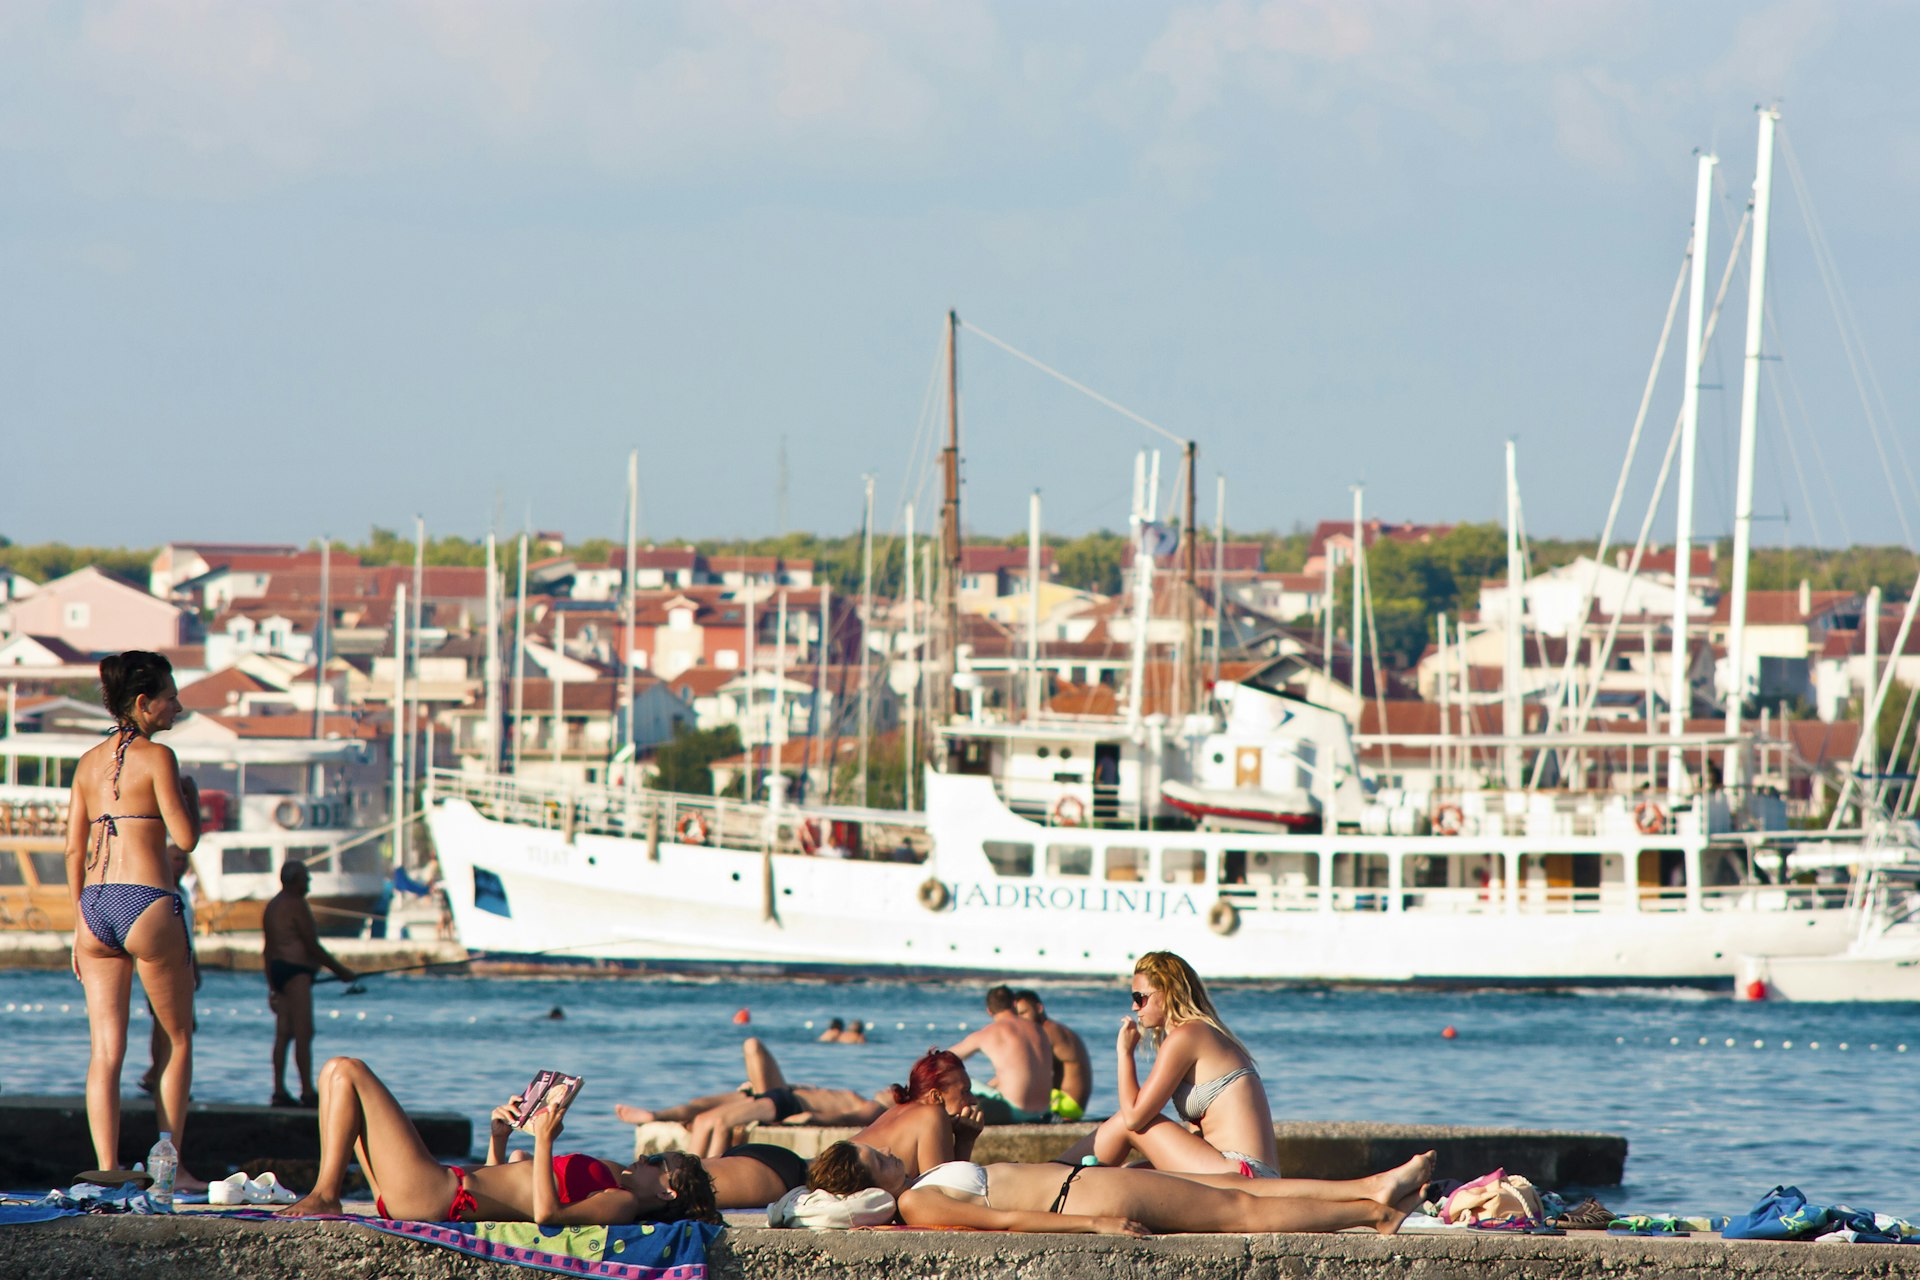 People in swimsuits sunbathe on the pier in Adriatic coast with sailboats, ship and houses in the distance behind them